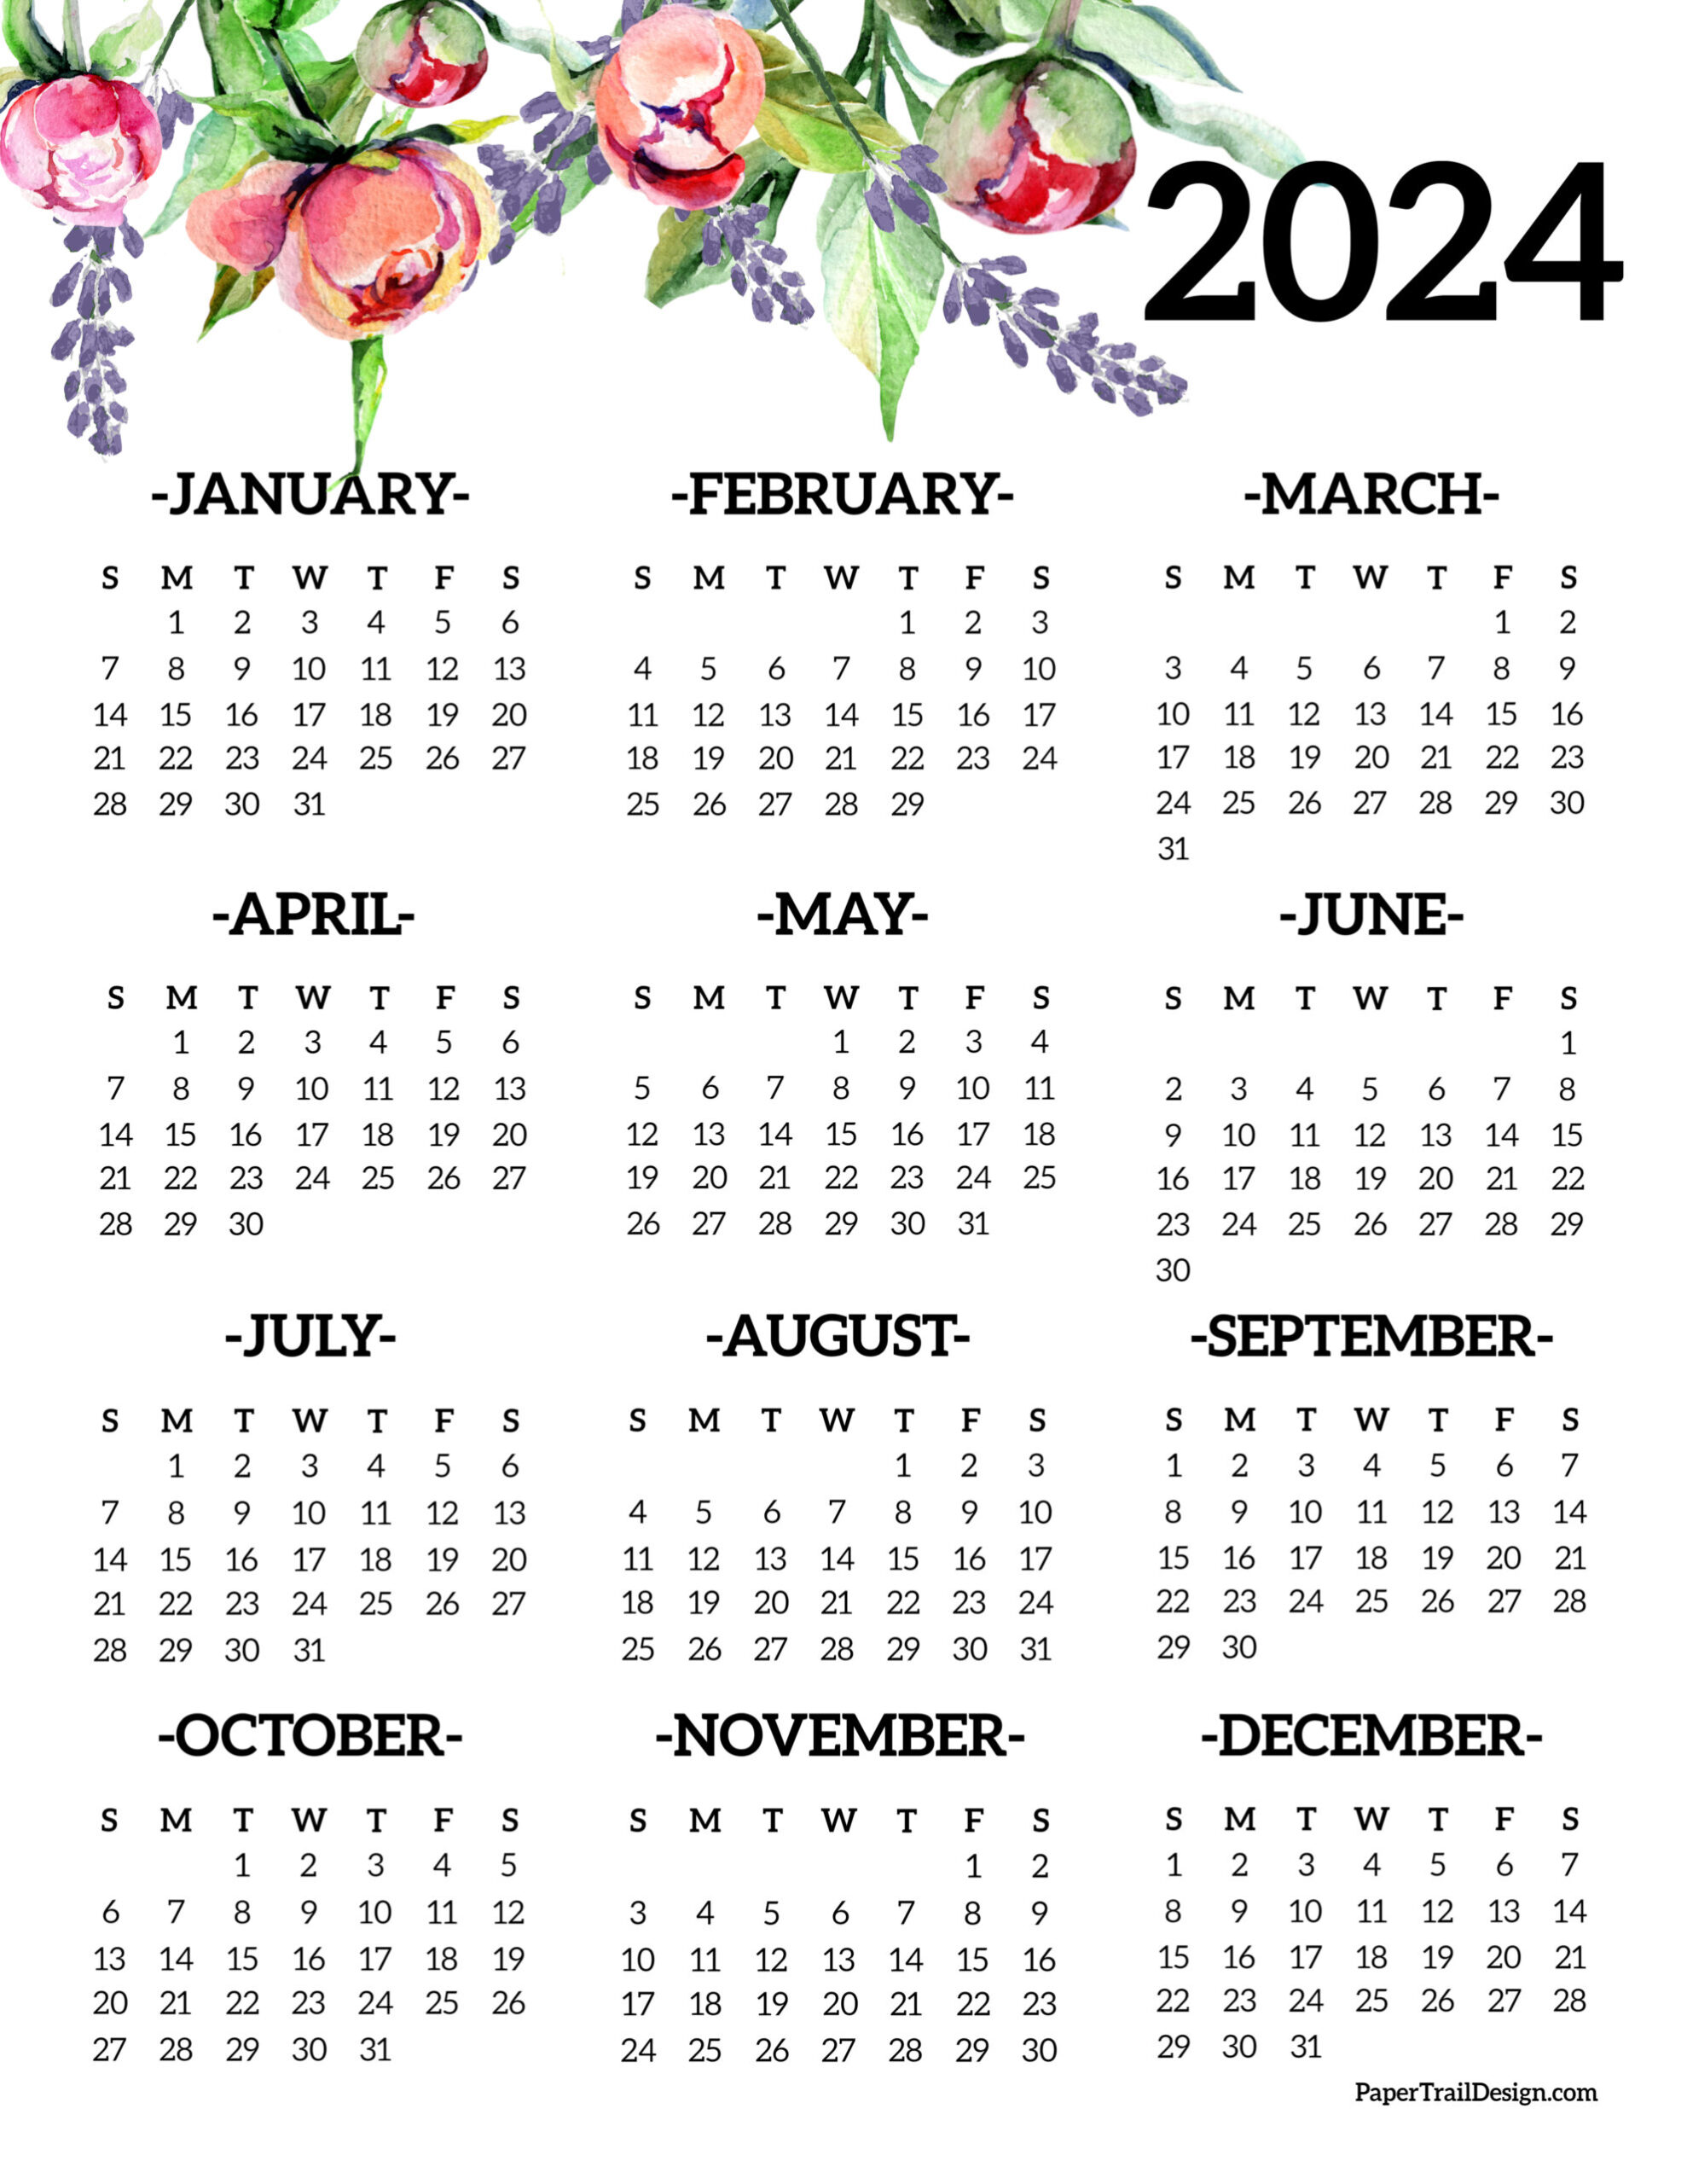 Calendar 2024 Printable One Page - Paper Trail Design for Printable 1 Year Calendar 2024